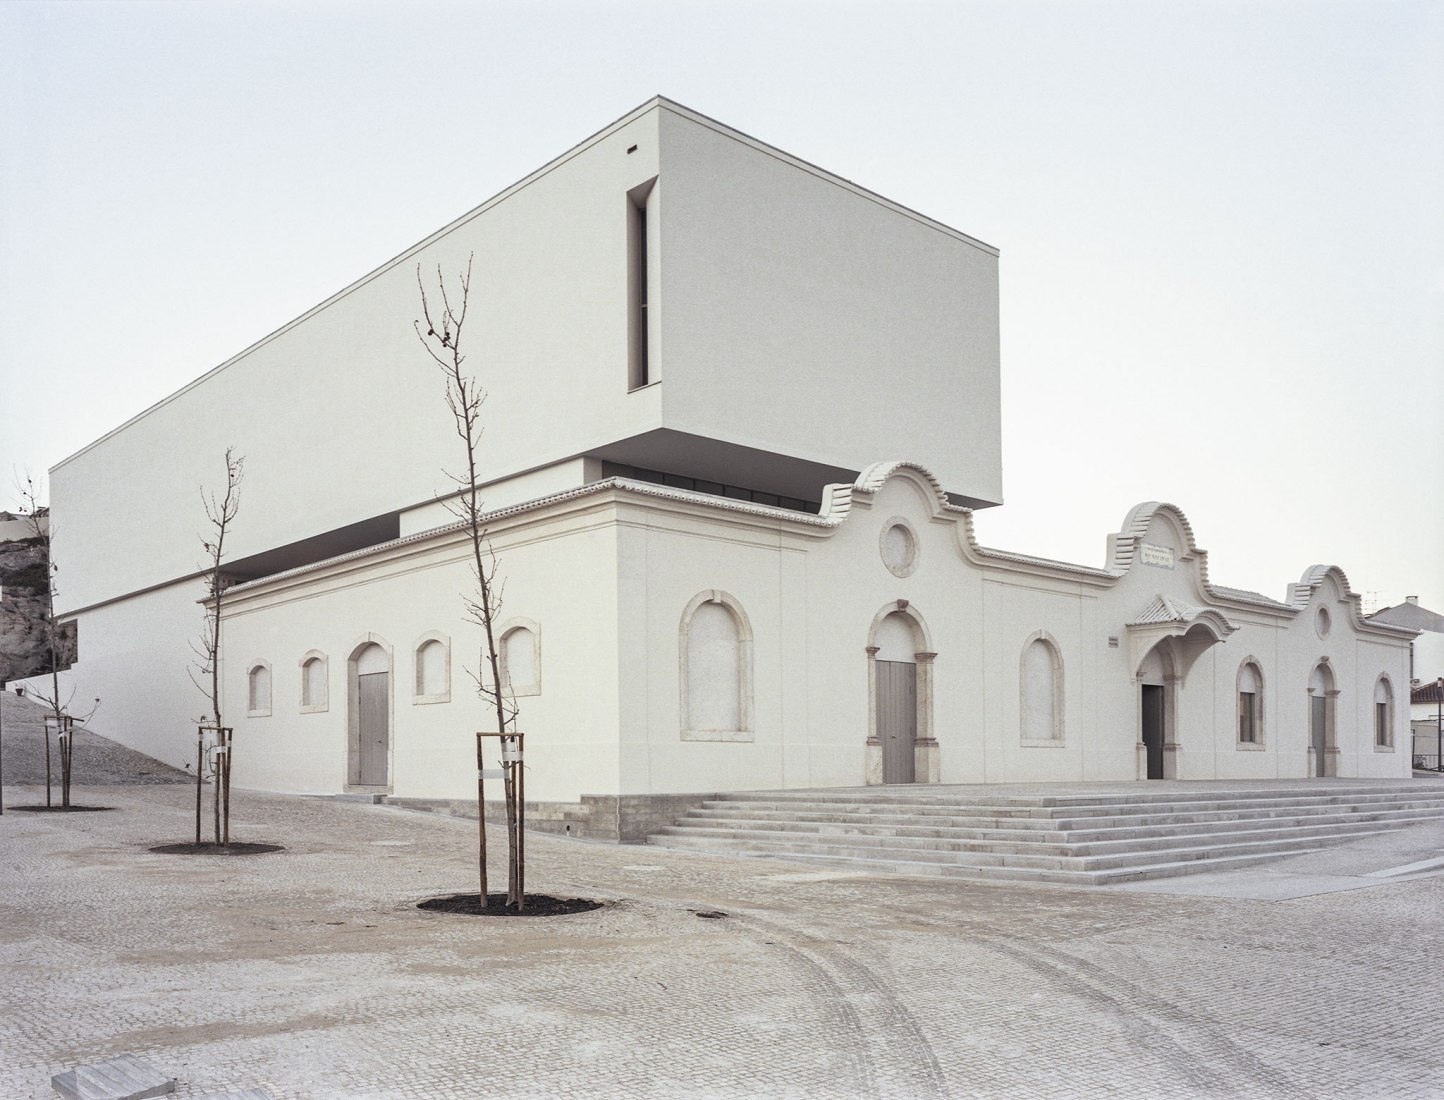 Carnival Arts Centre by José Neves. Photograph by Paulo Catrica. 